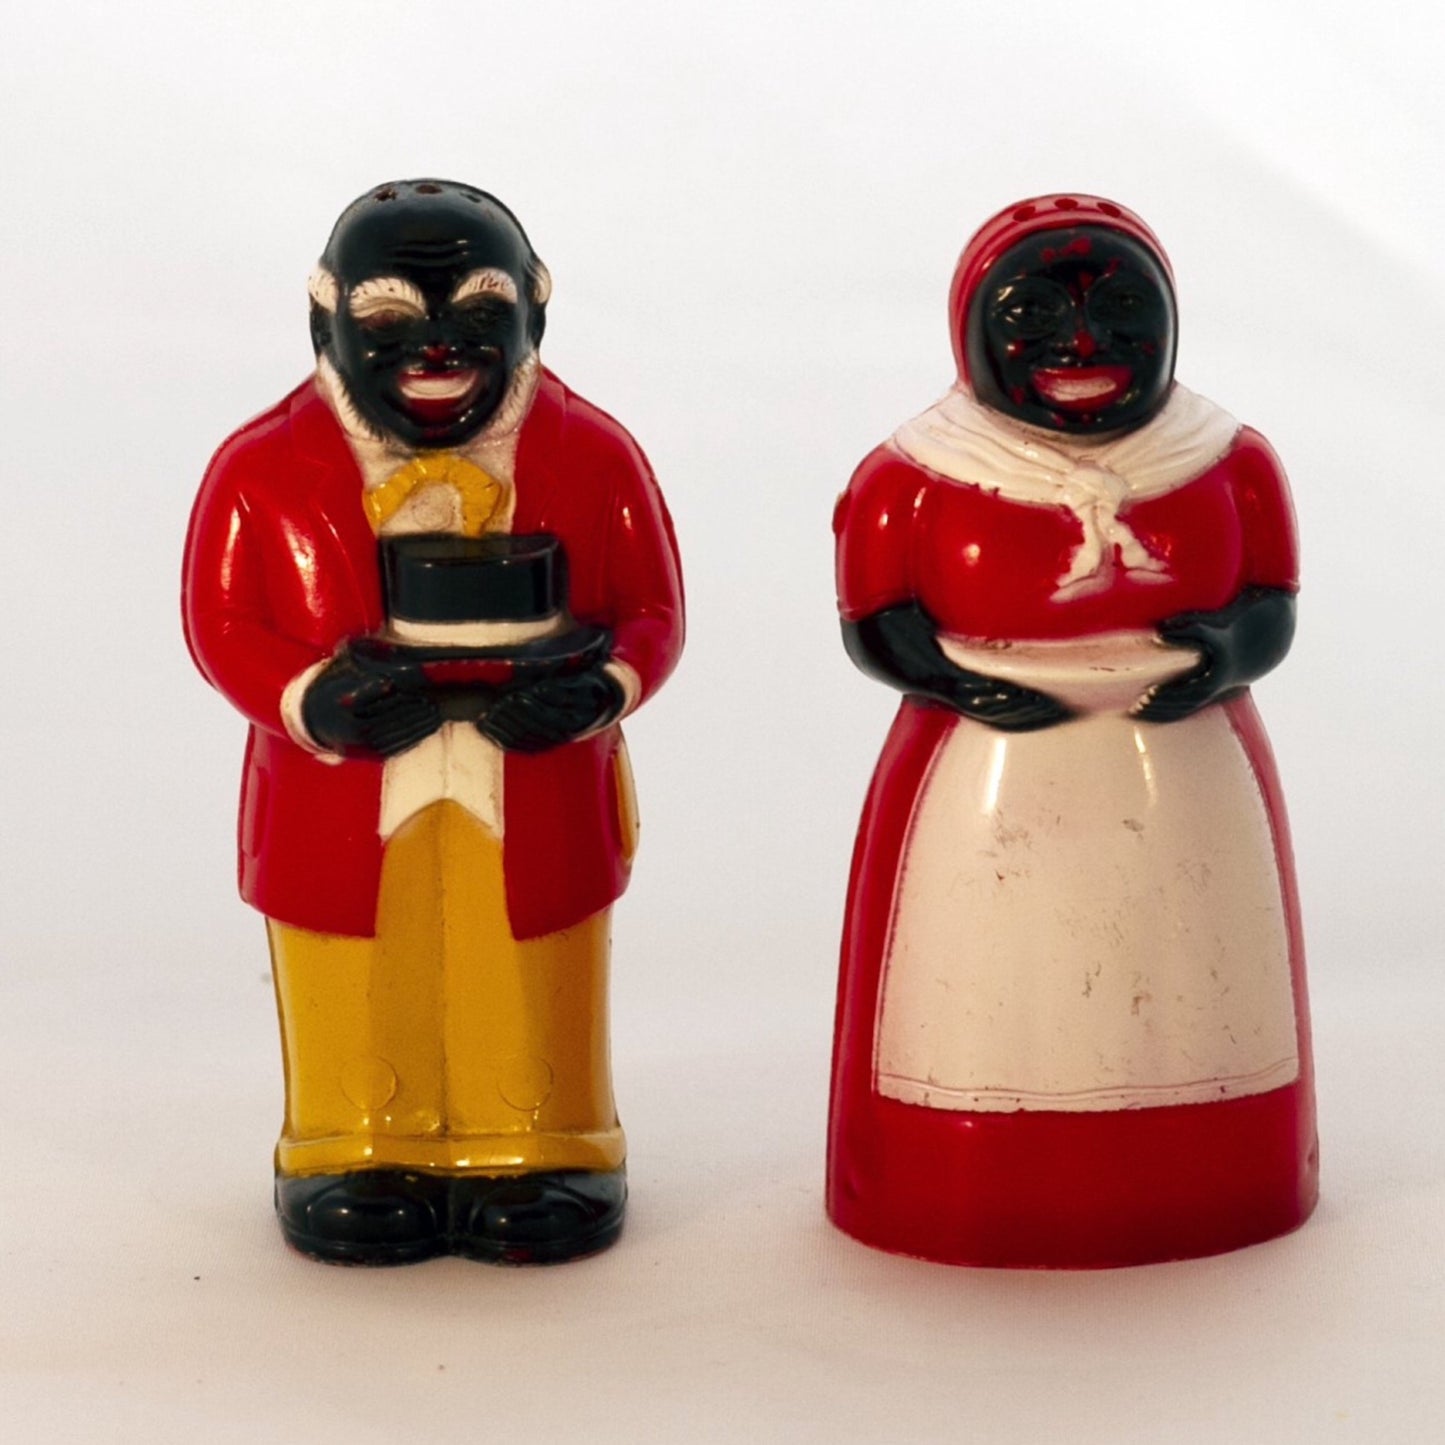 Black Americana Molded Hard Plastic 1940s JEMIMA & MOSE SHAKERS 3 ½” Made by F & F Mold and Die Works